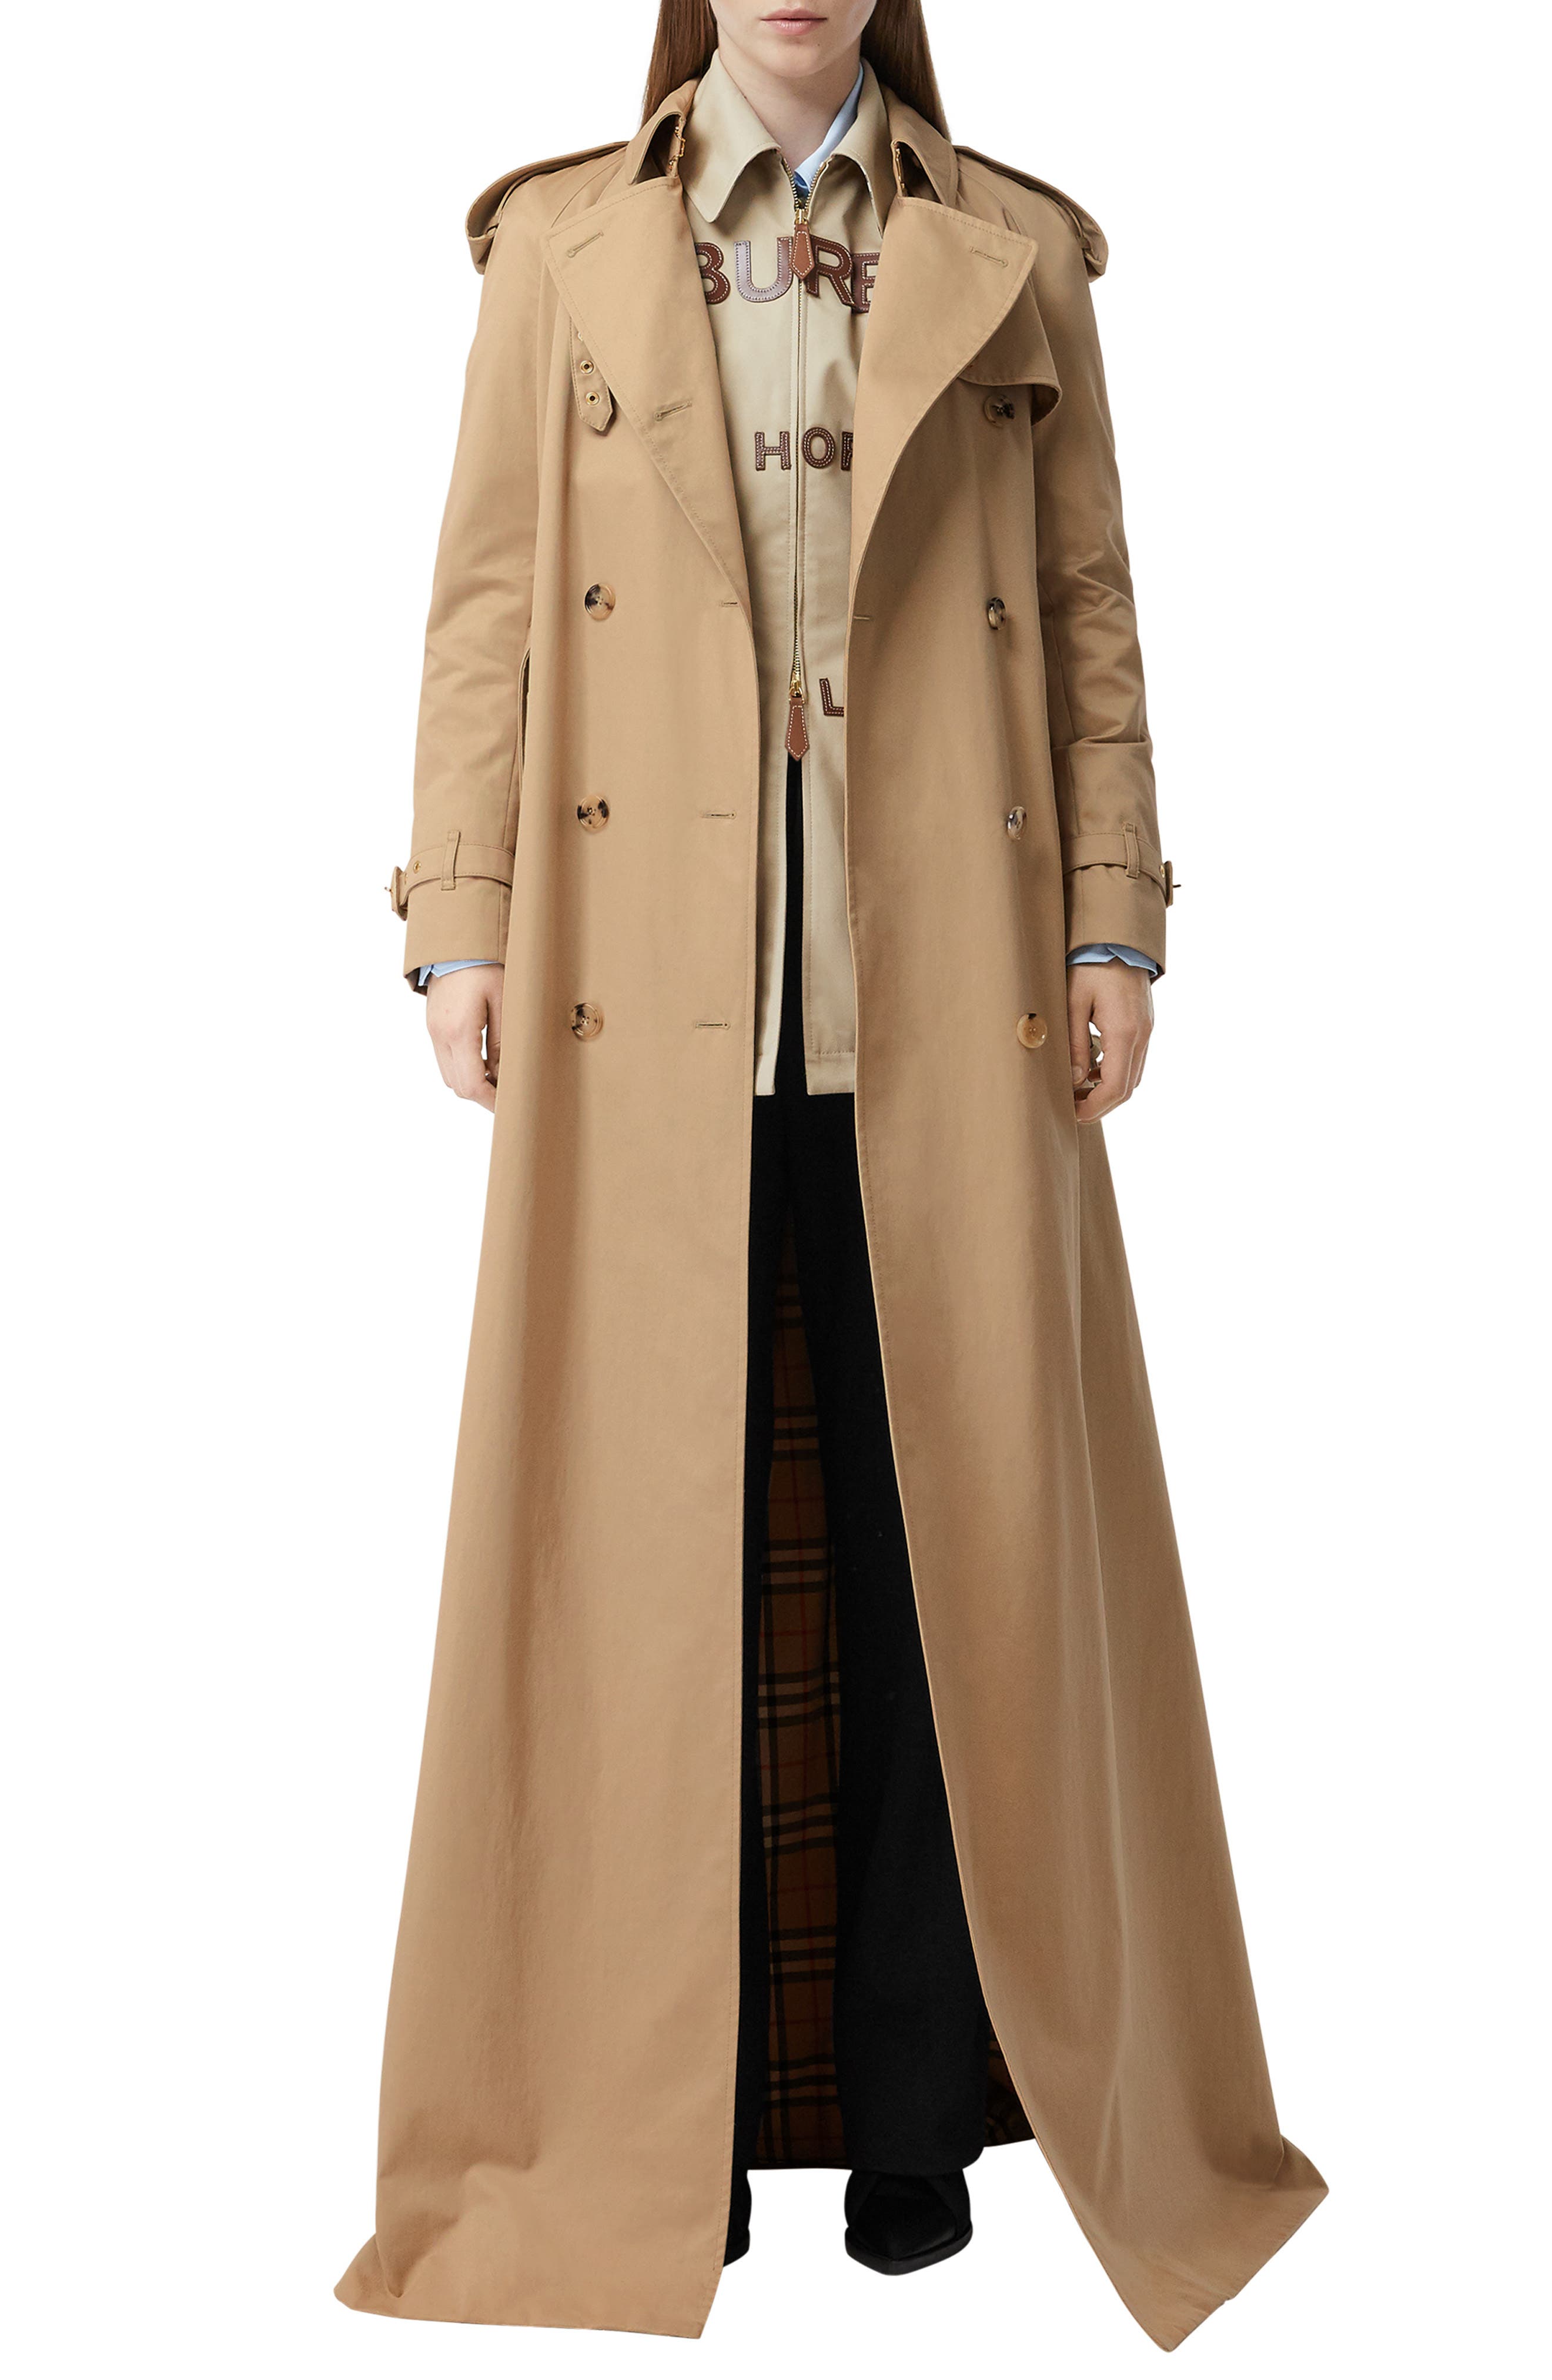 burberry fur trench